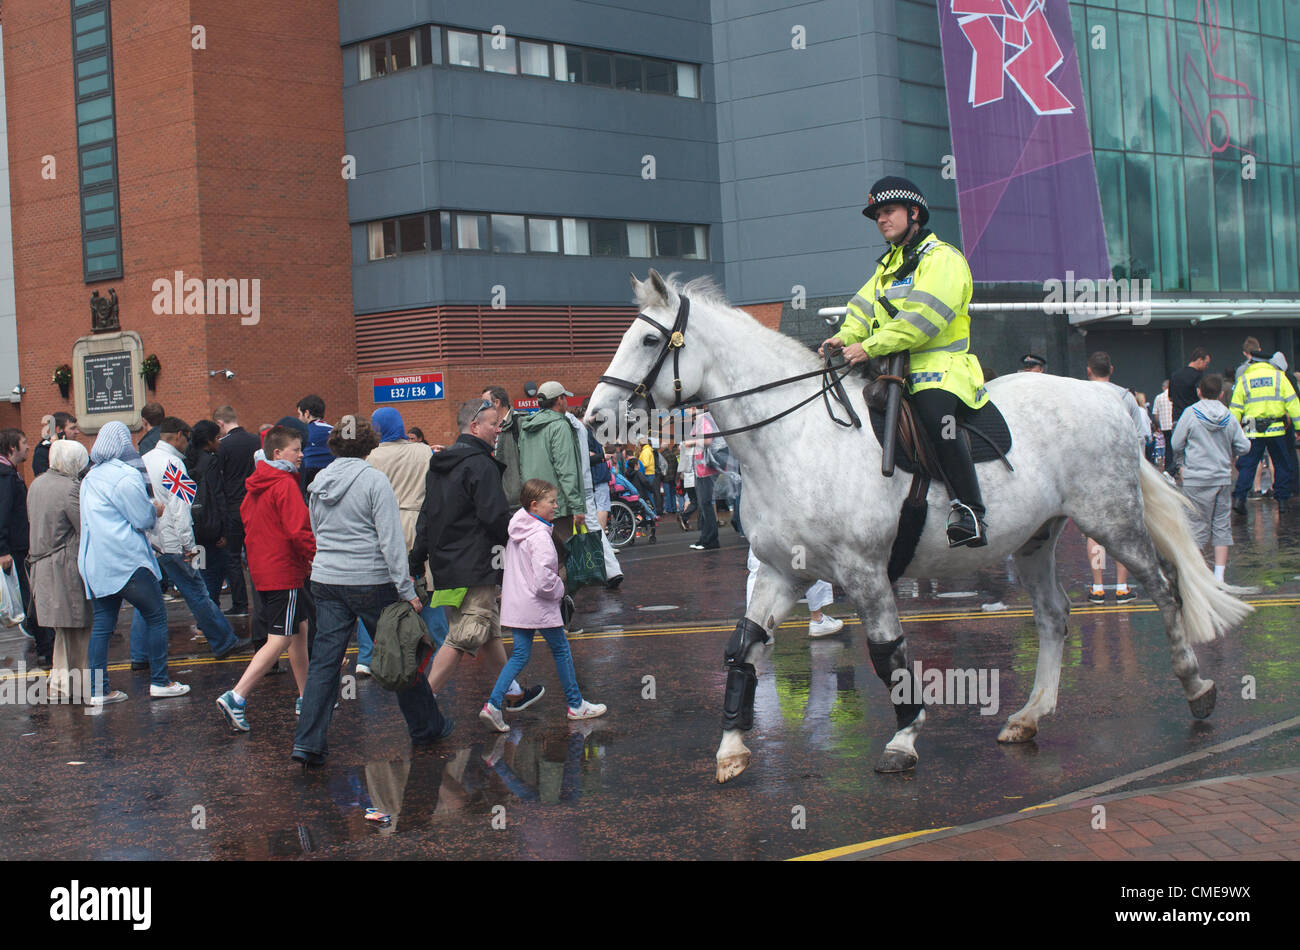 A police-officer on horseback is on duty outside Old Trafford, Manchester United's ground, where Olympic Football matches  will be played later in the afternoon.Brazil v Belarus will be followed by Egypt v New Zealand. Manchester, UK 29-07-2012 Stock Photo